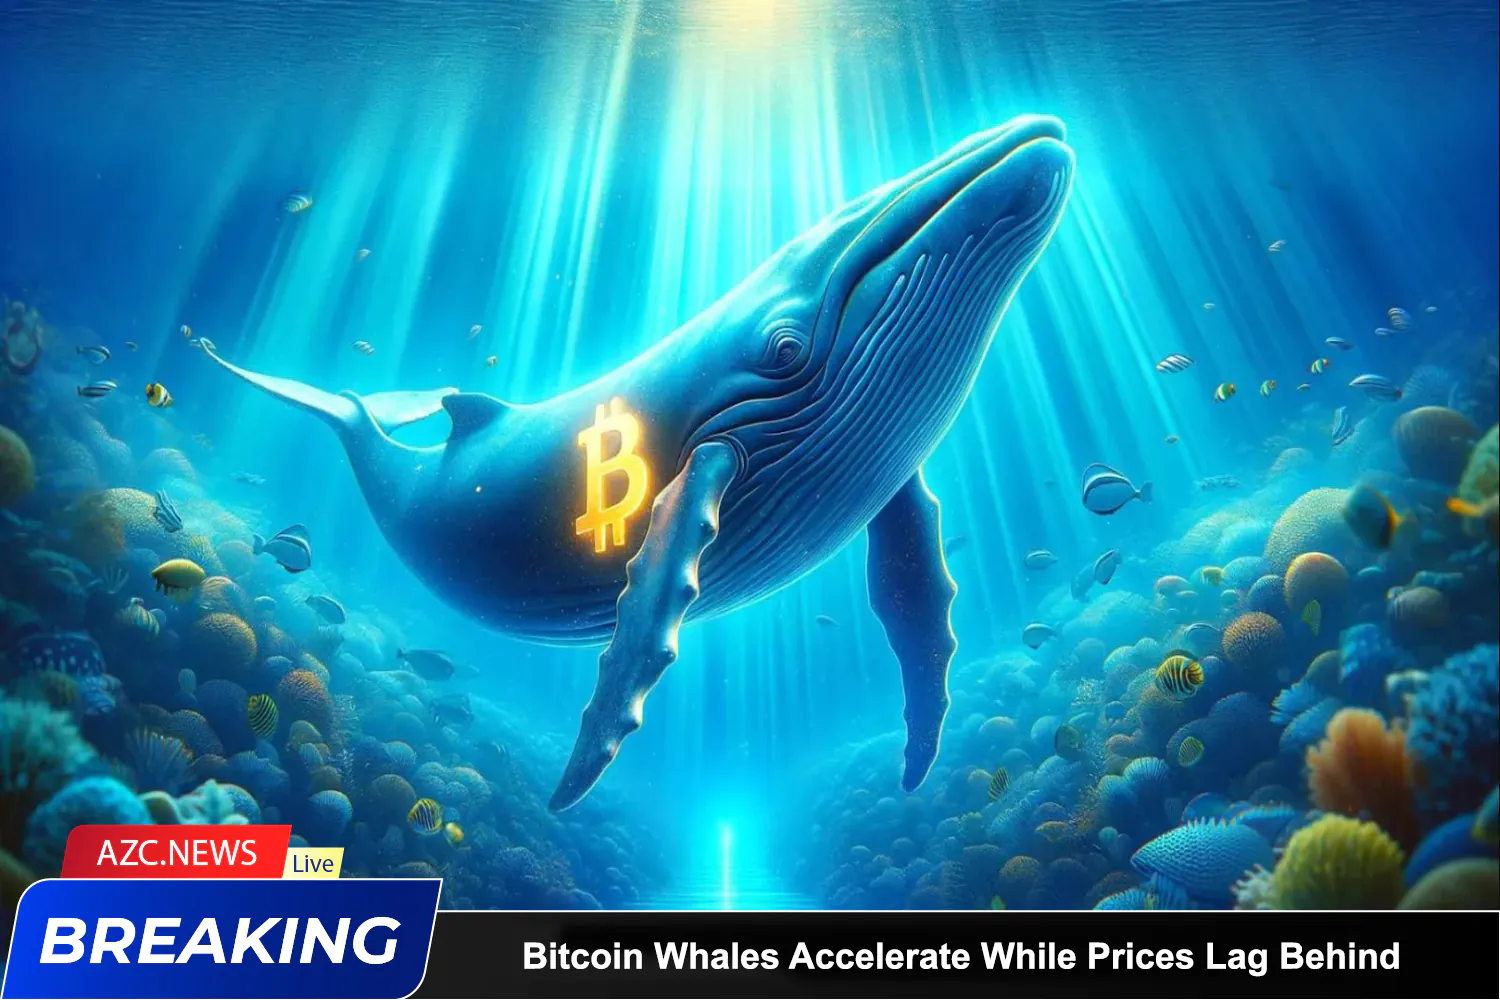 Azcnews Bitcoin Whales Accelerate While Prices Lag Behind